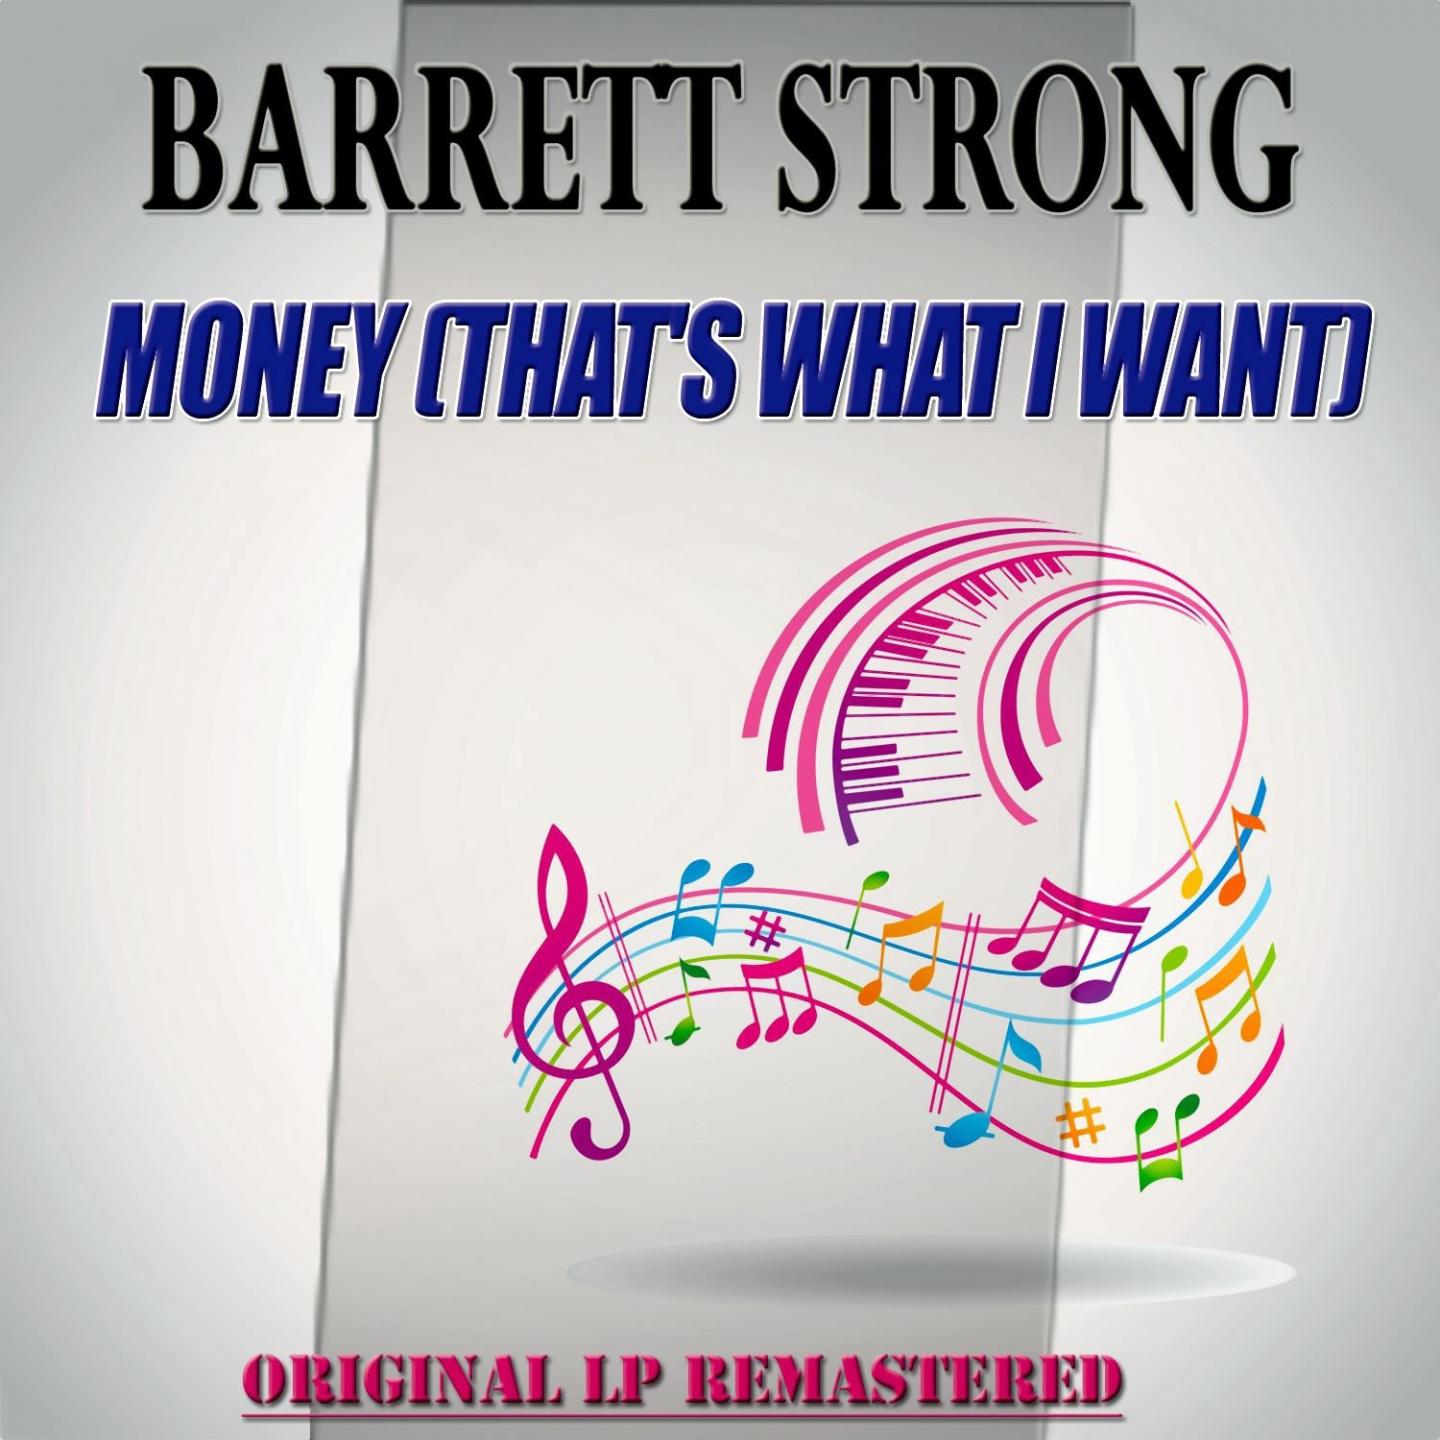 Money (That's What I Want) - Original Lp Remastered